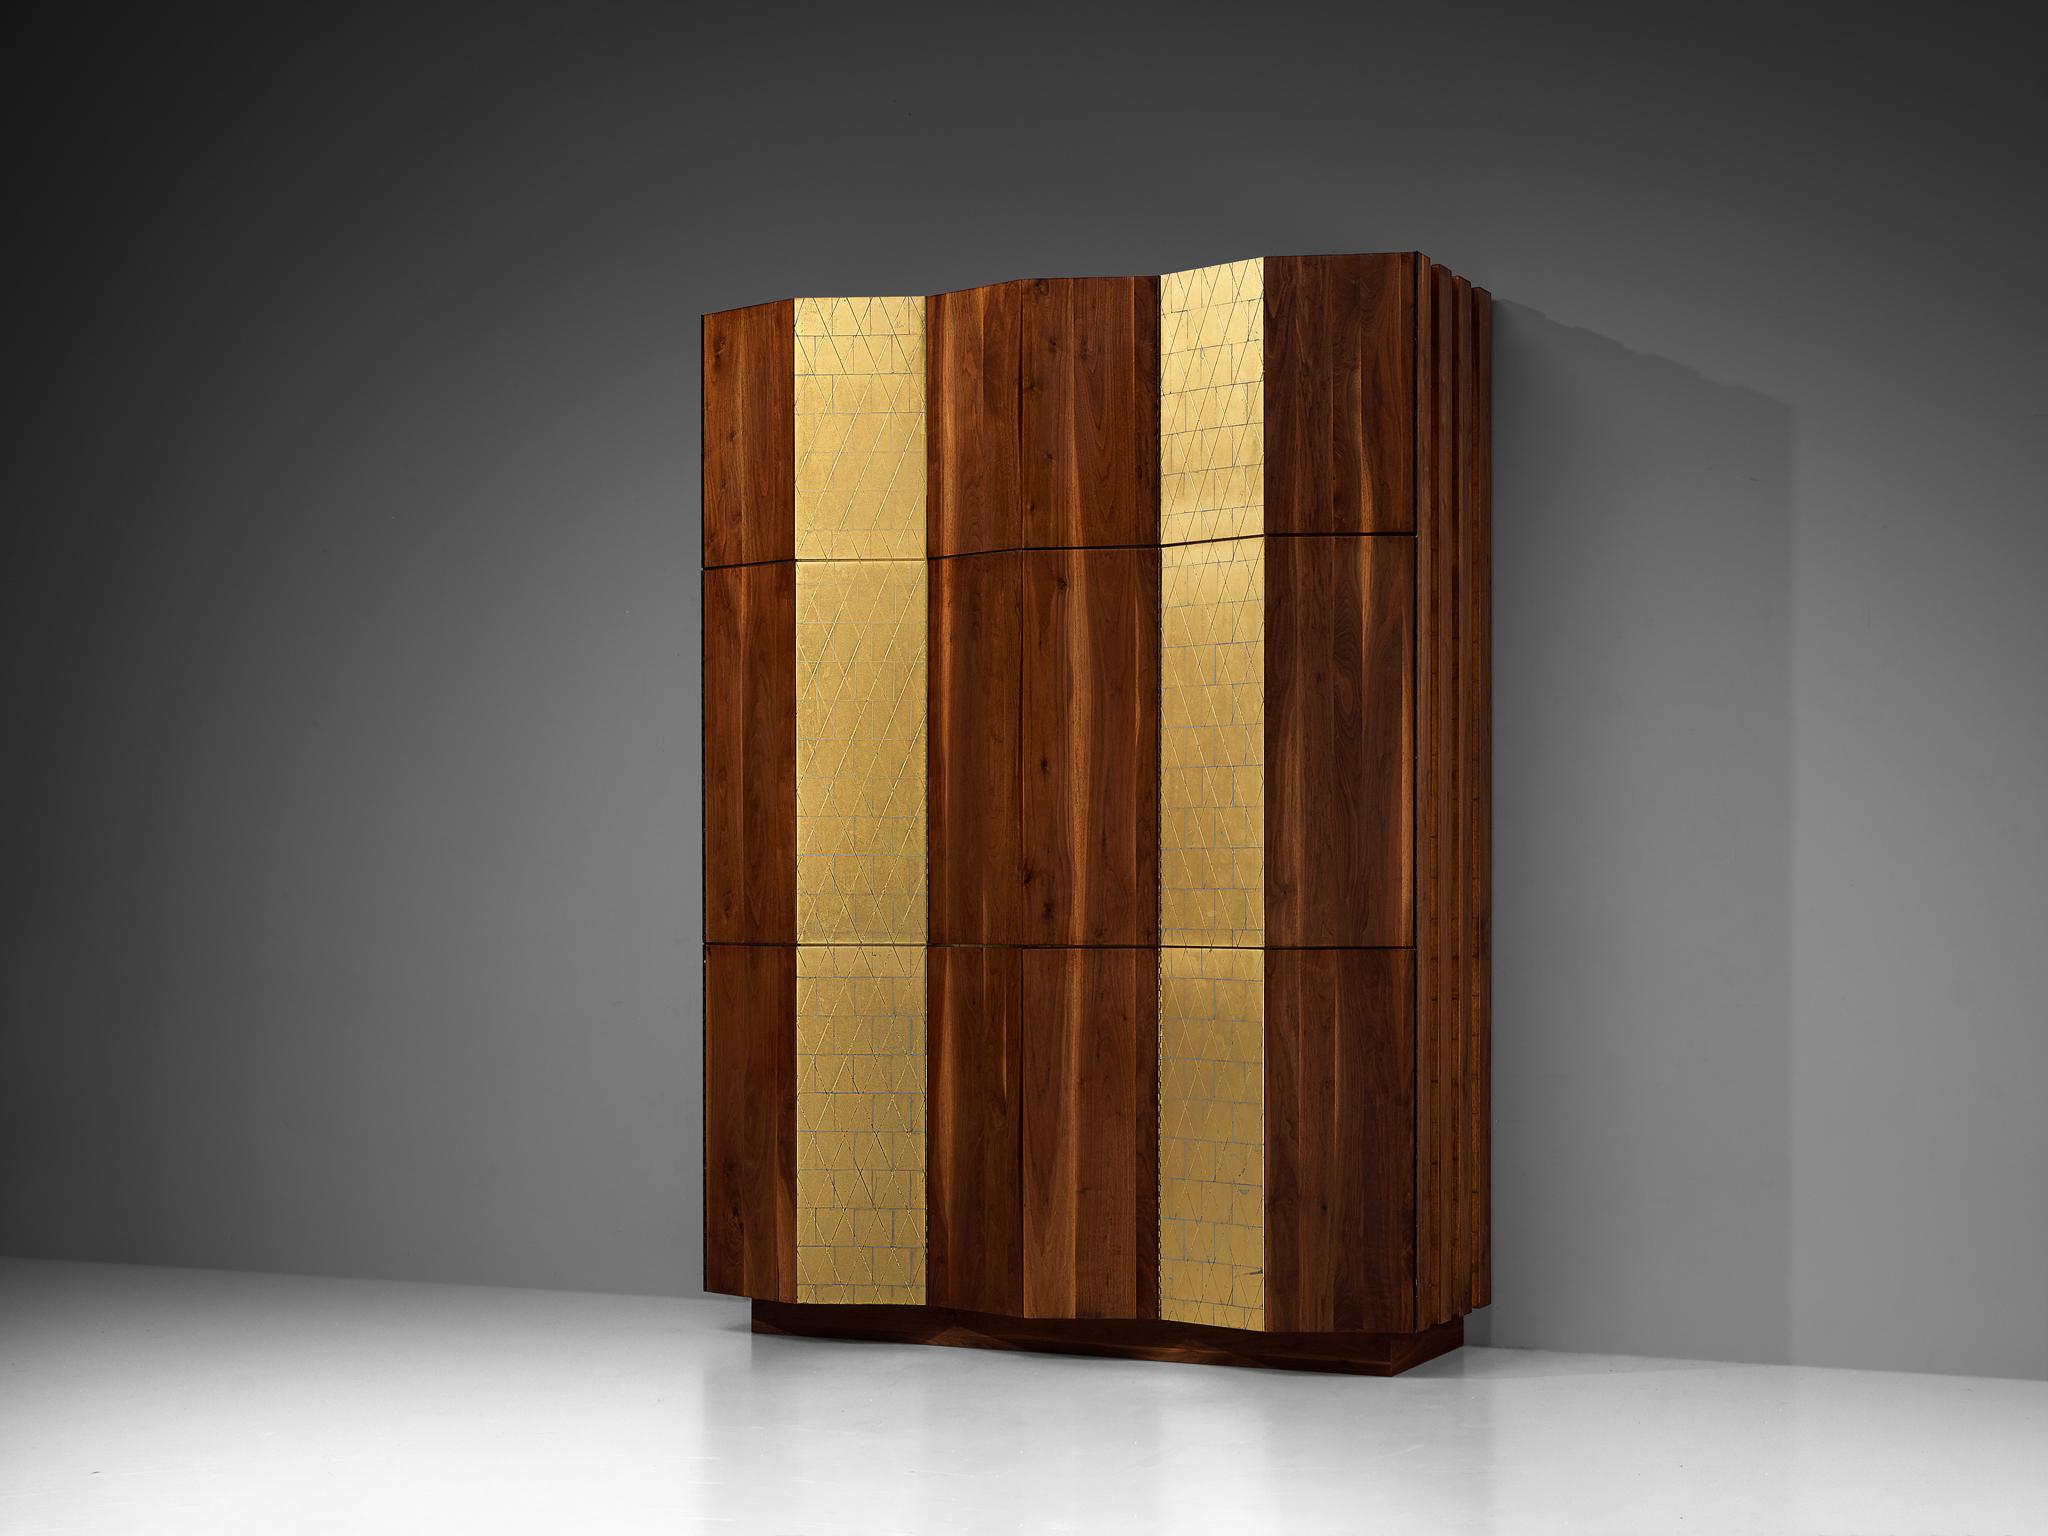 Phillip Lloyd Powell, large cabinet, walnut, gold leaf, painted wood, United States, circa 1965

Crafted by the skilled hands of Phillip Lloyd Powell, this highboard stands as a testament to the designer’s bespoke artistry. It is a unique creation